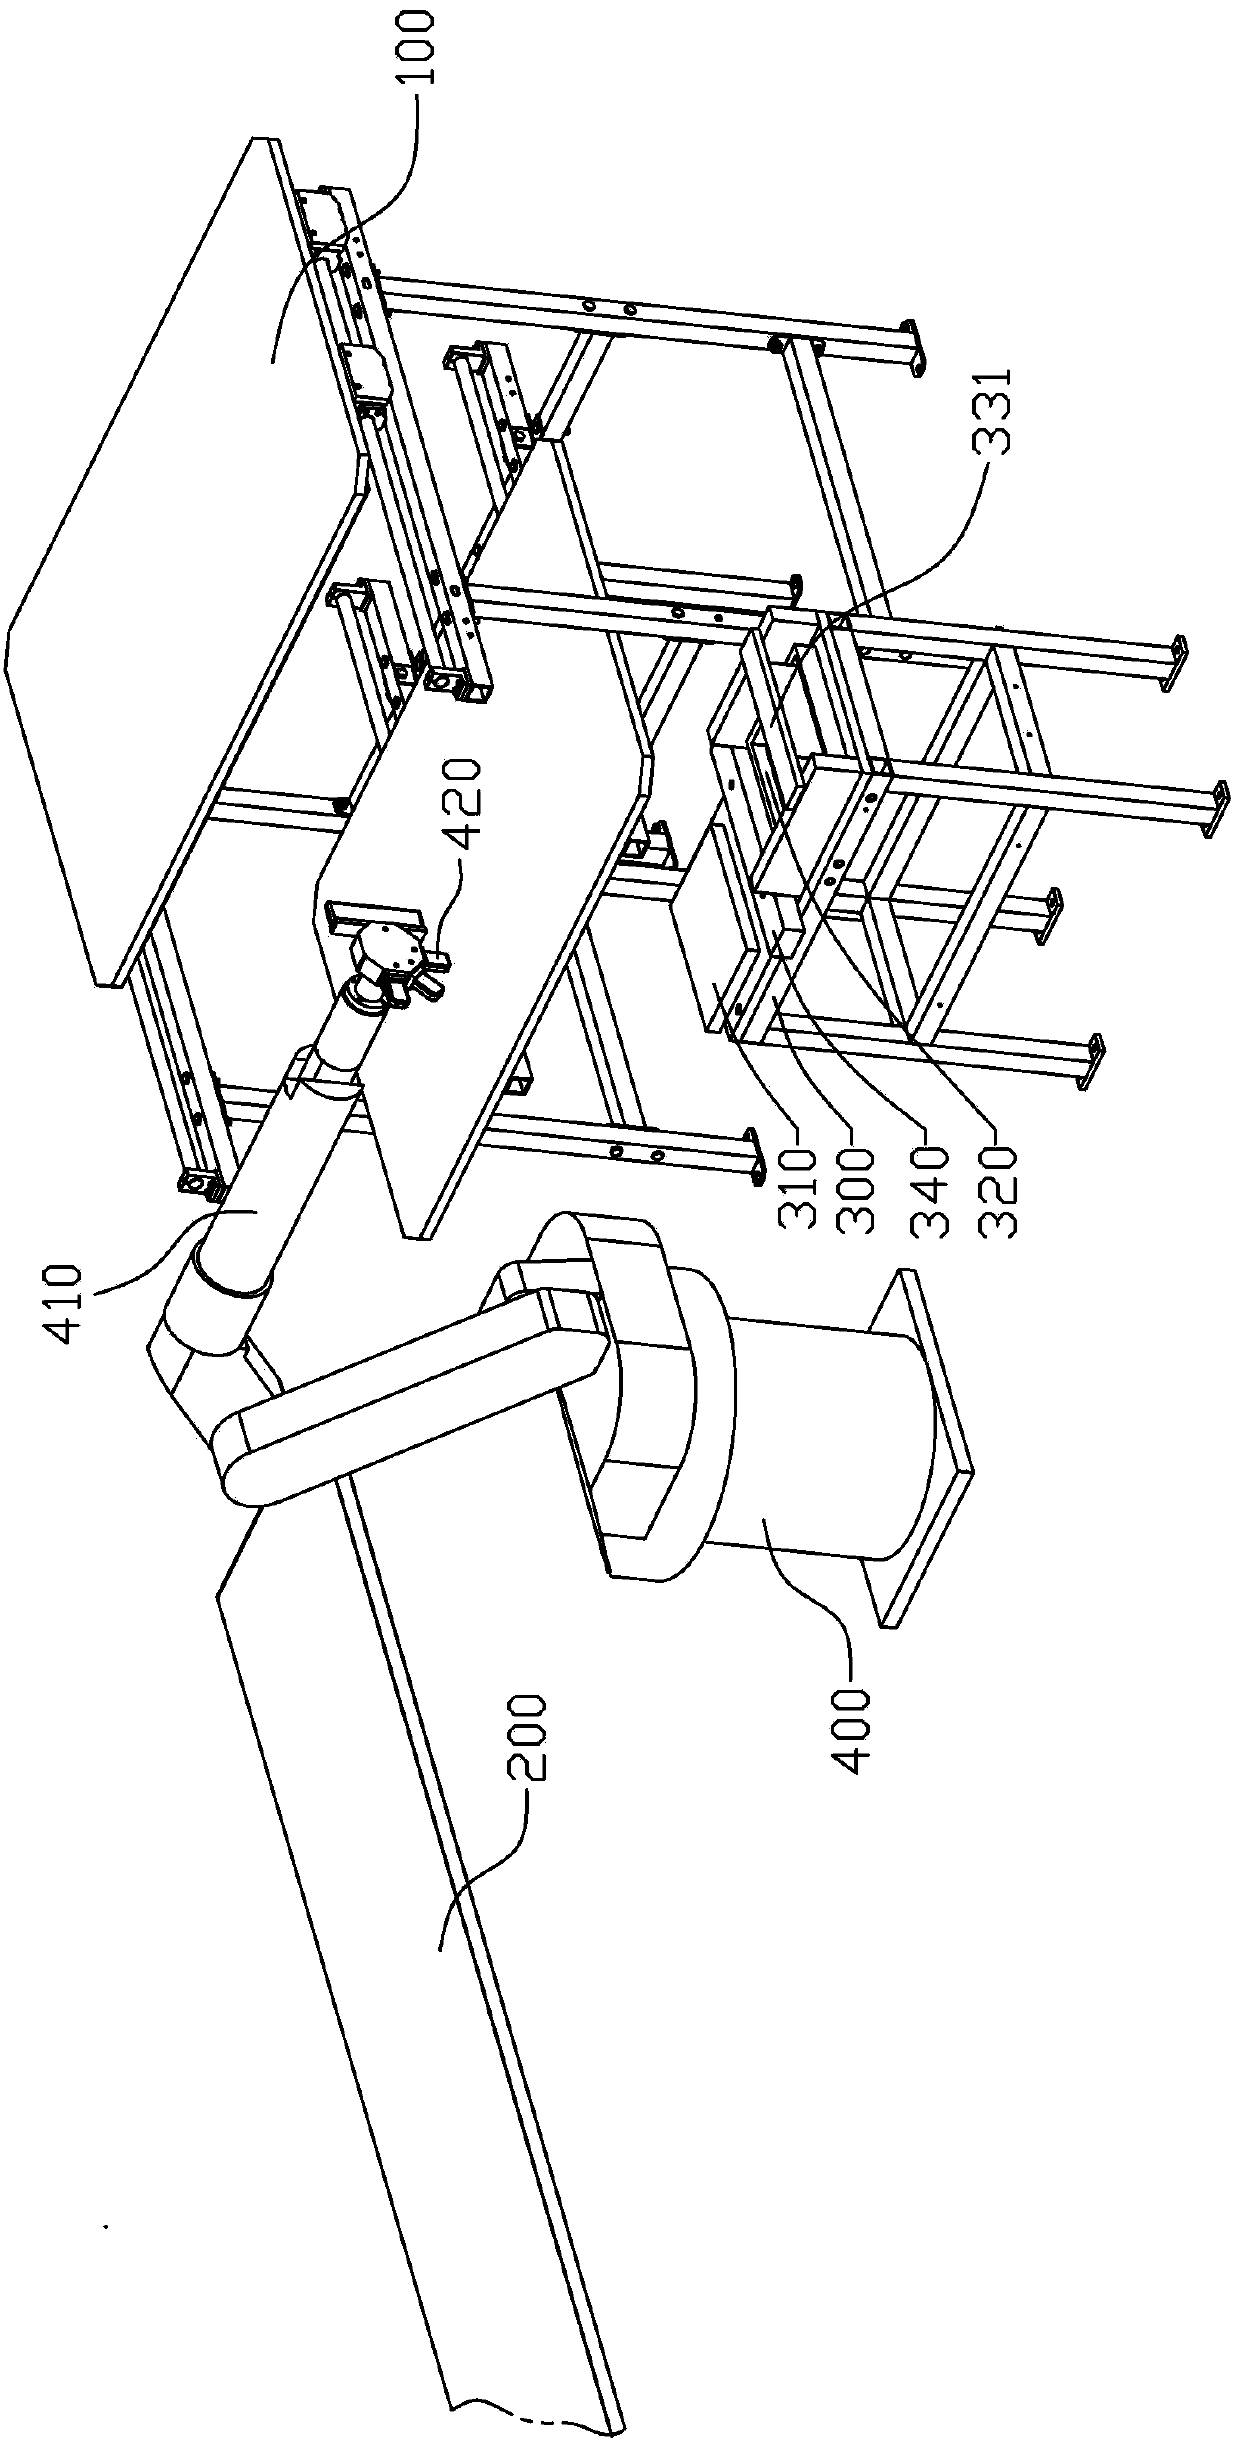 Automatic transfer printing device